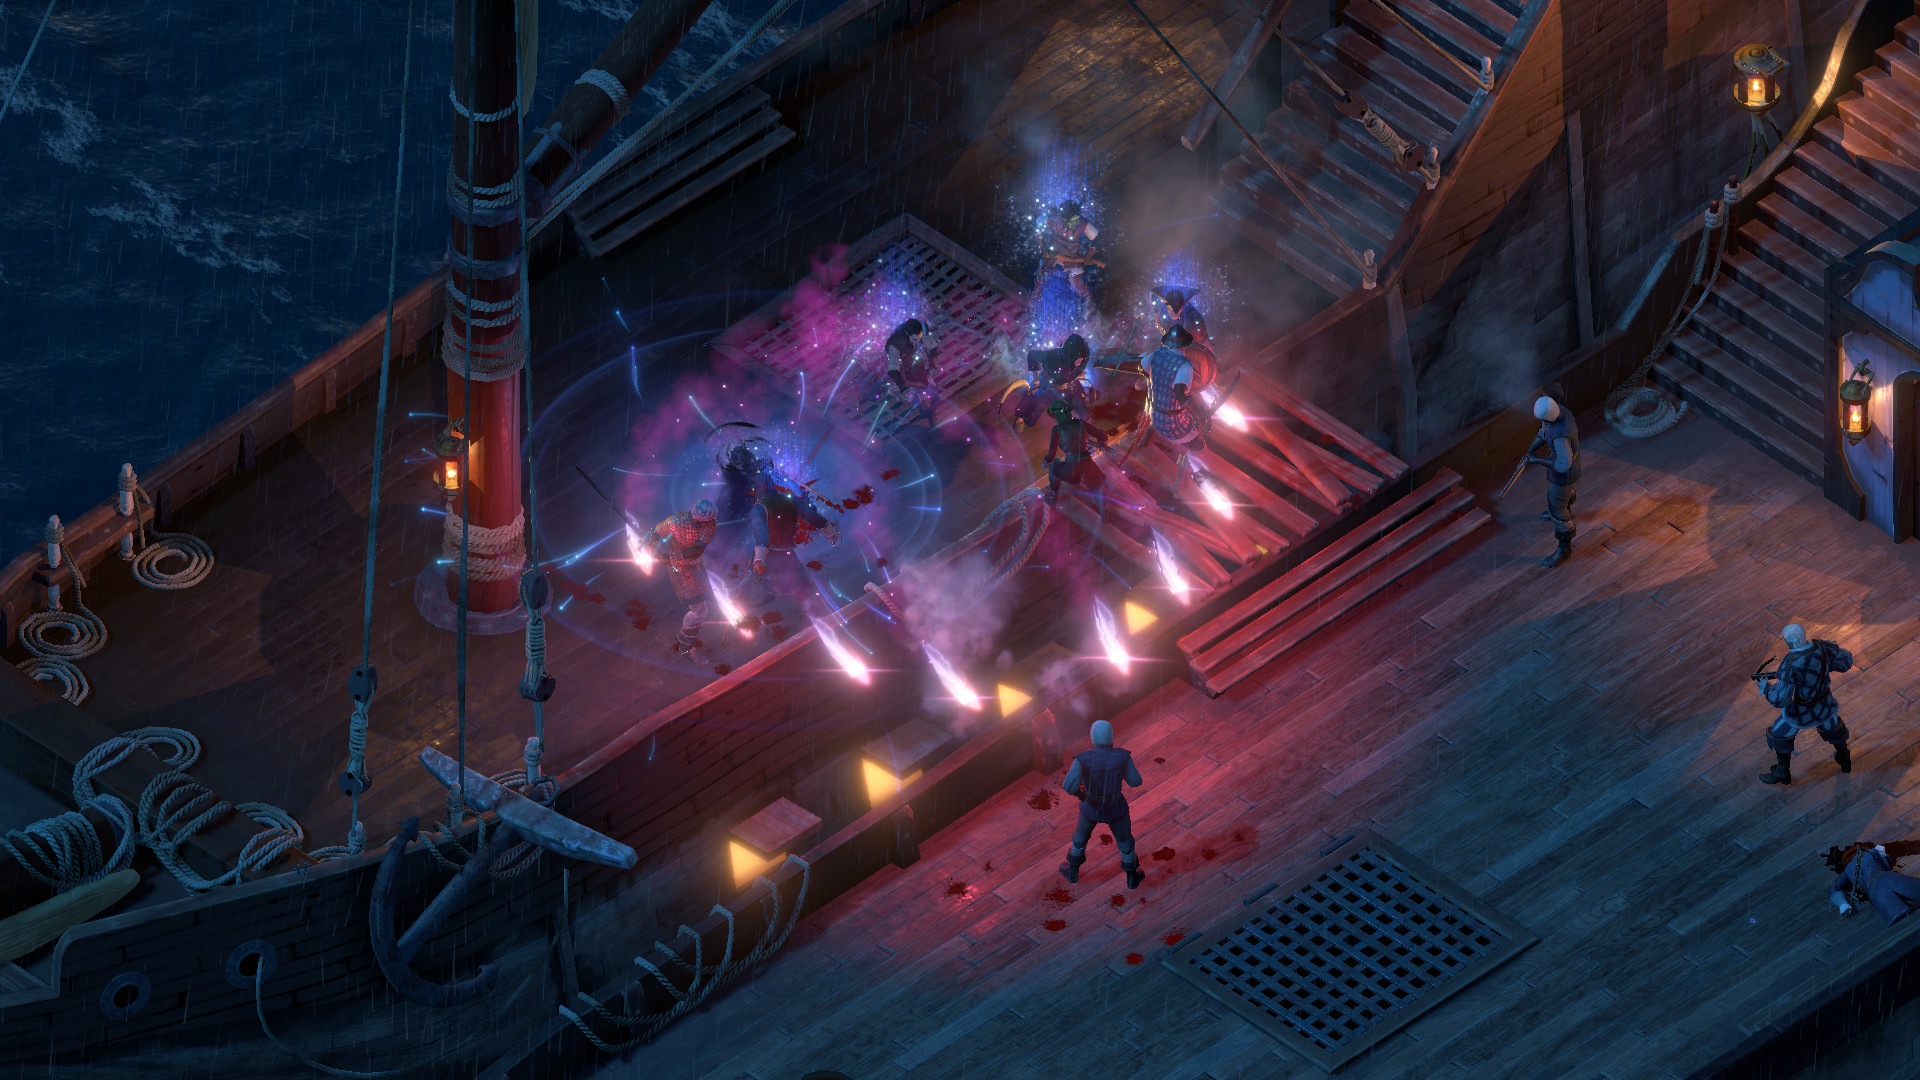 Pillars Of Eternity II: Deadfire Review - The Best RPG On The High Seas